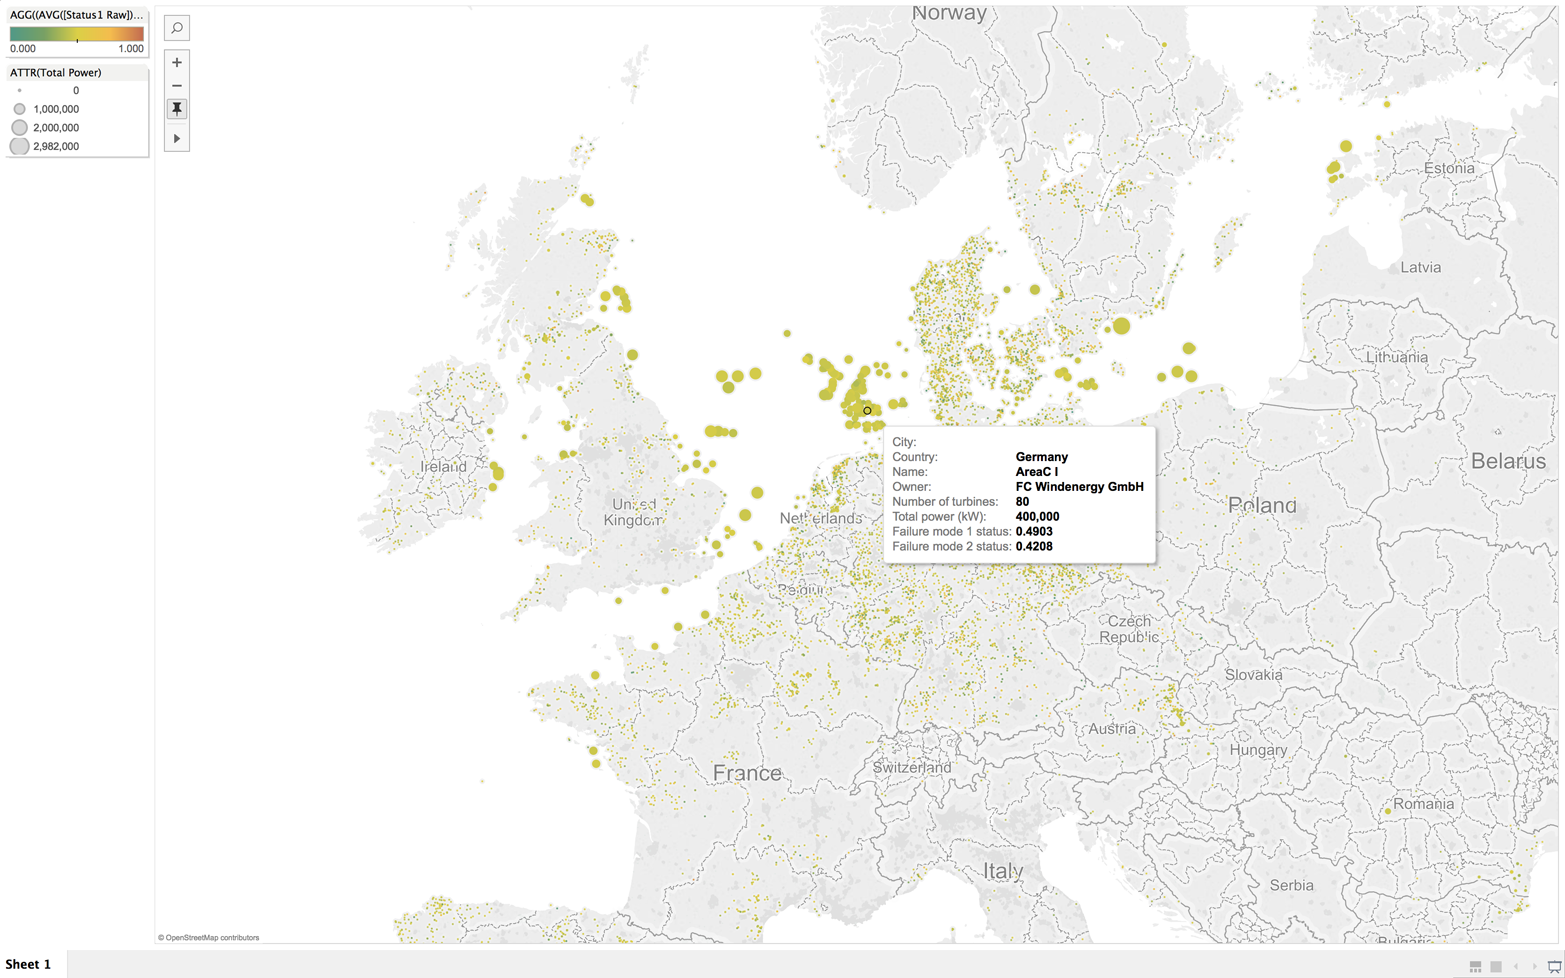 Tableau dashboard showing geographic distribution of wind farms in Europe